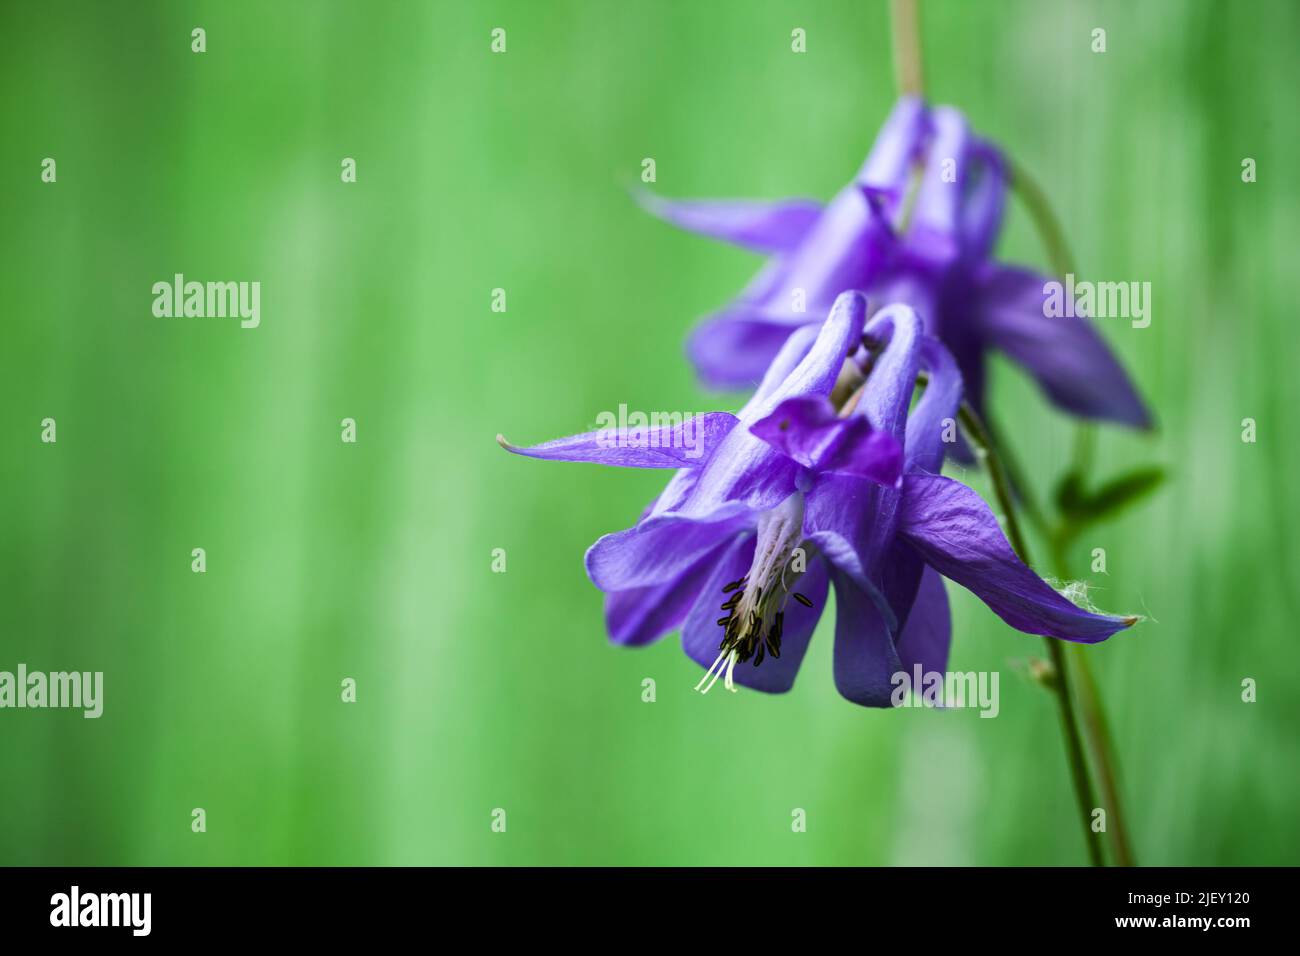 Purple Flowers of the Aquilegia vulgaris is a species of columbine native to Europe also known as European columbine, common columbine, grannys nightc Stock Photo